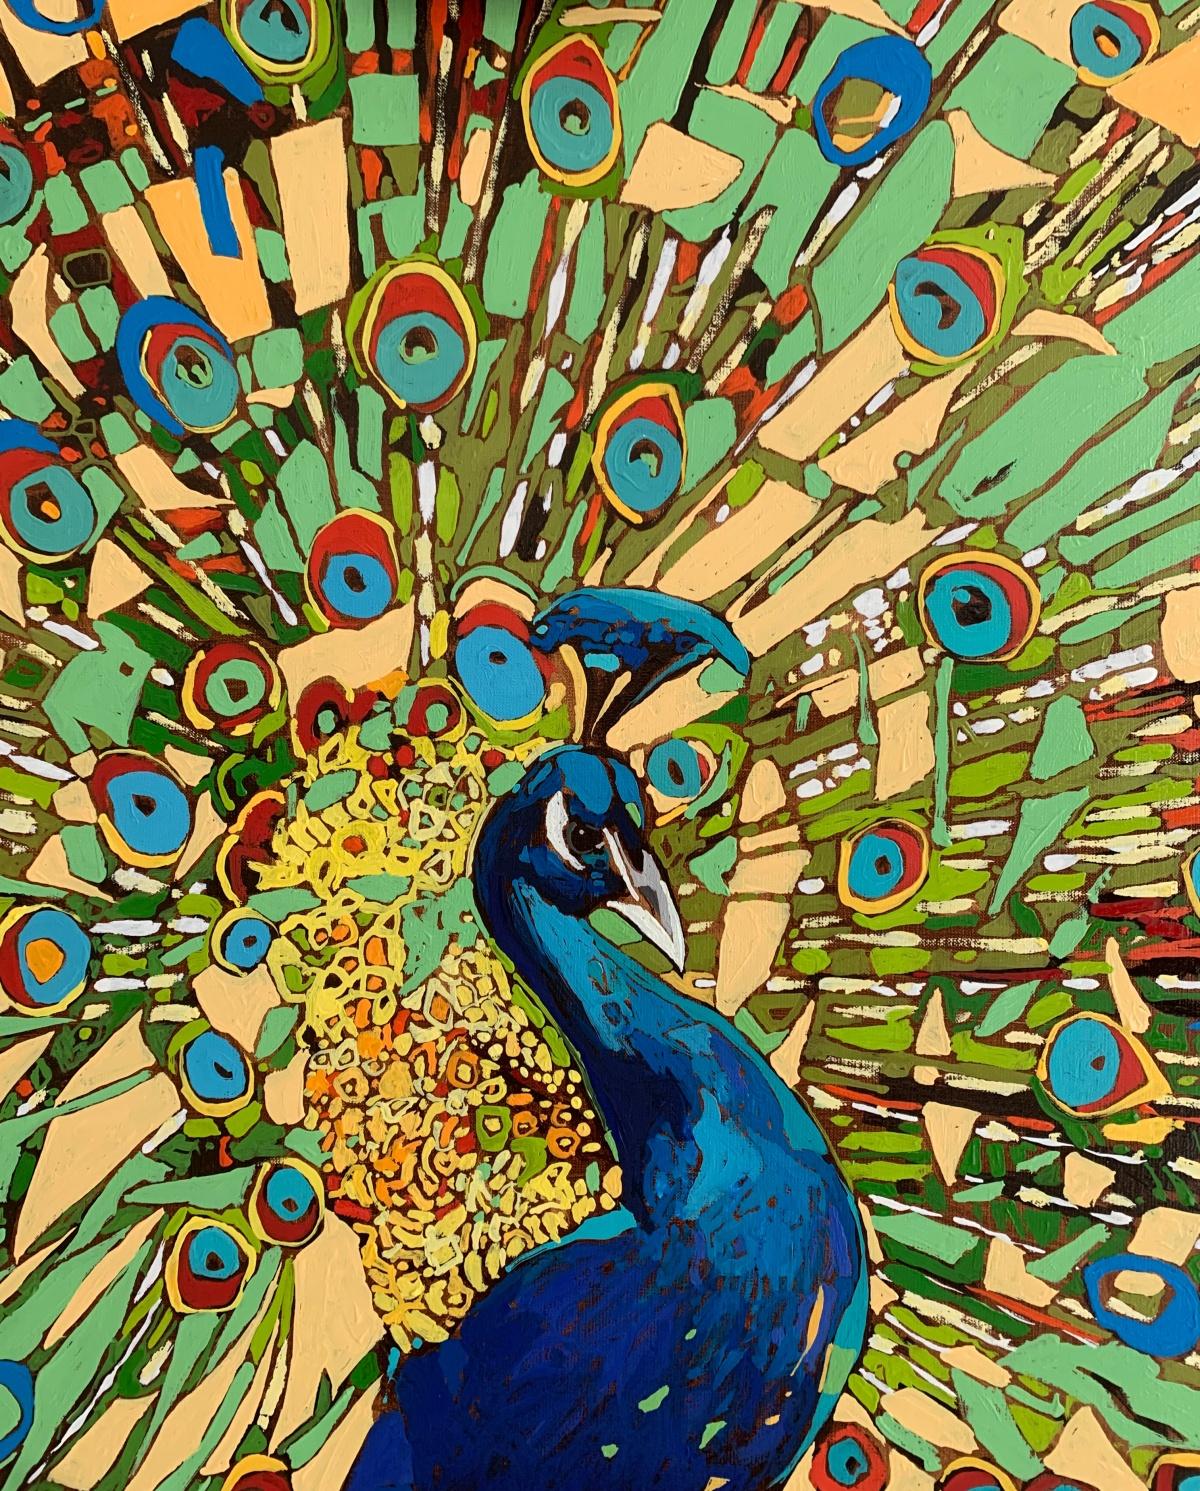 Contemporary figurative oil on canvas painting by Polish artist Rafal Gadowski. Painting in pop art style depicting a peacock. The background is geometric and colorful. Painting is bright with many dynamic shapes. Title of this painting is 'TA